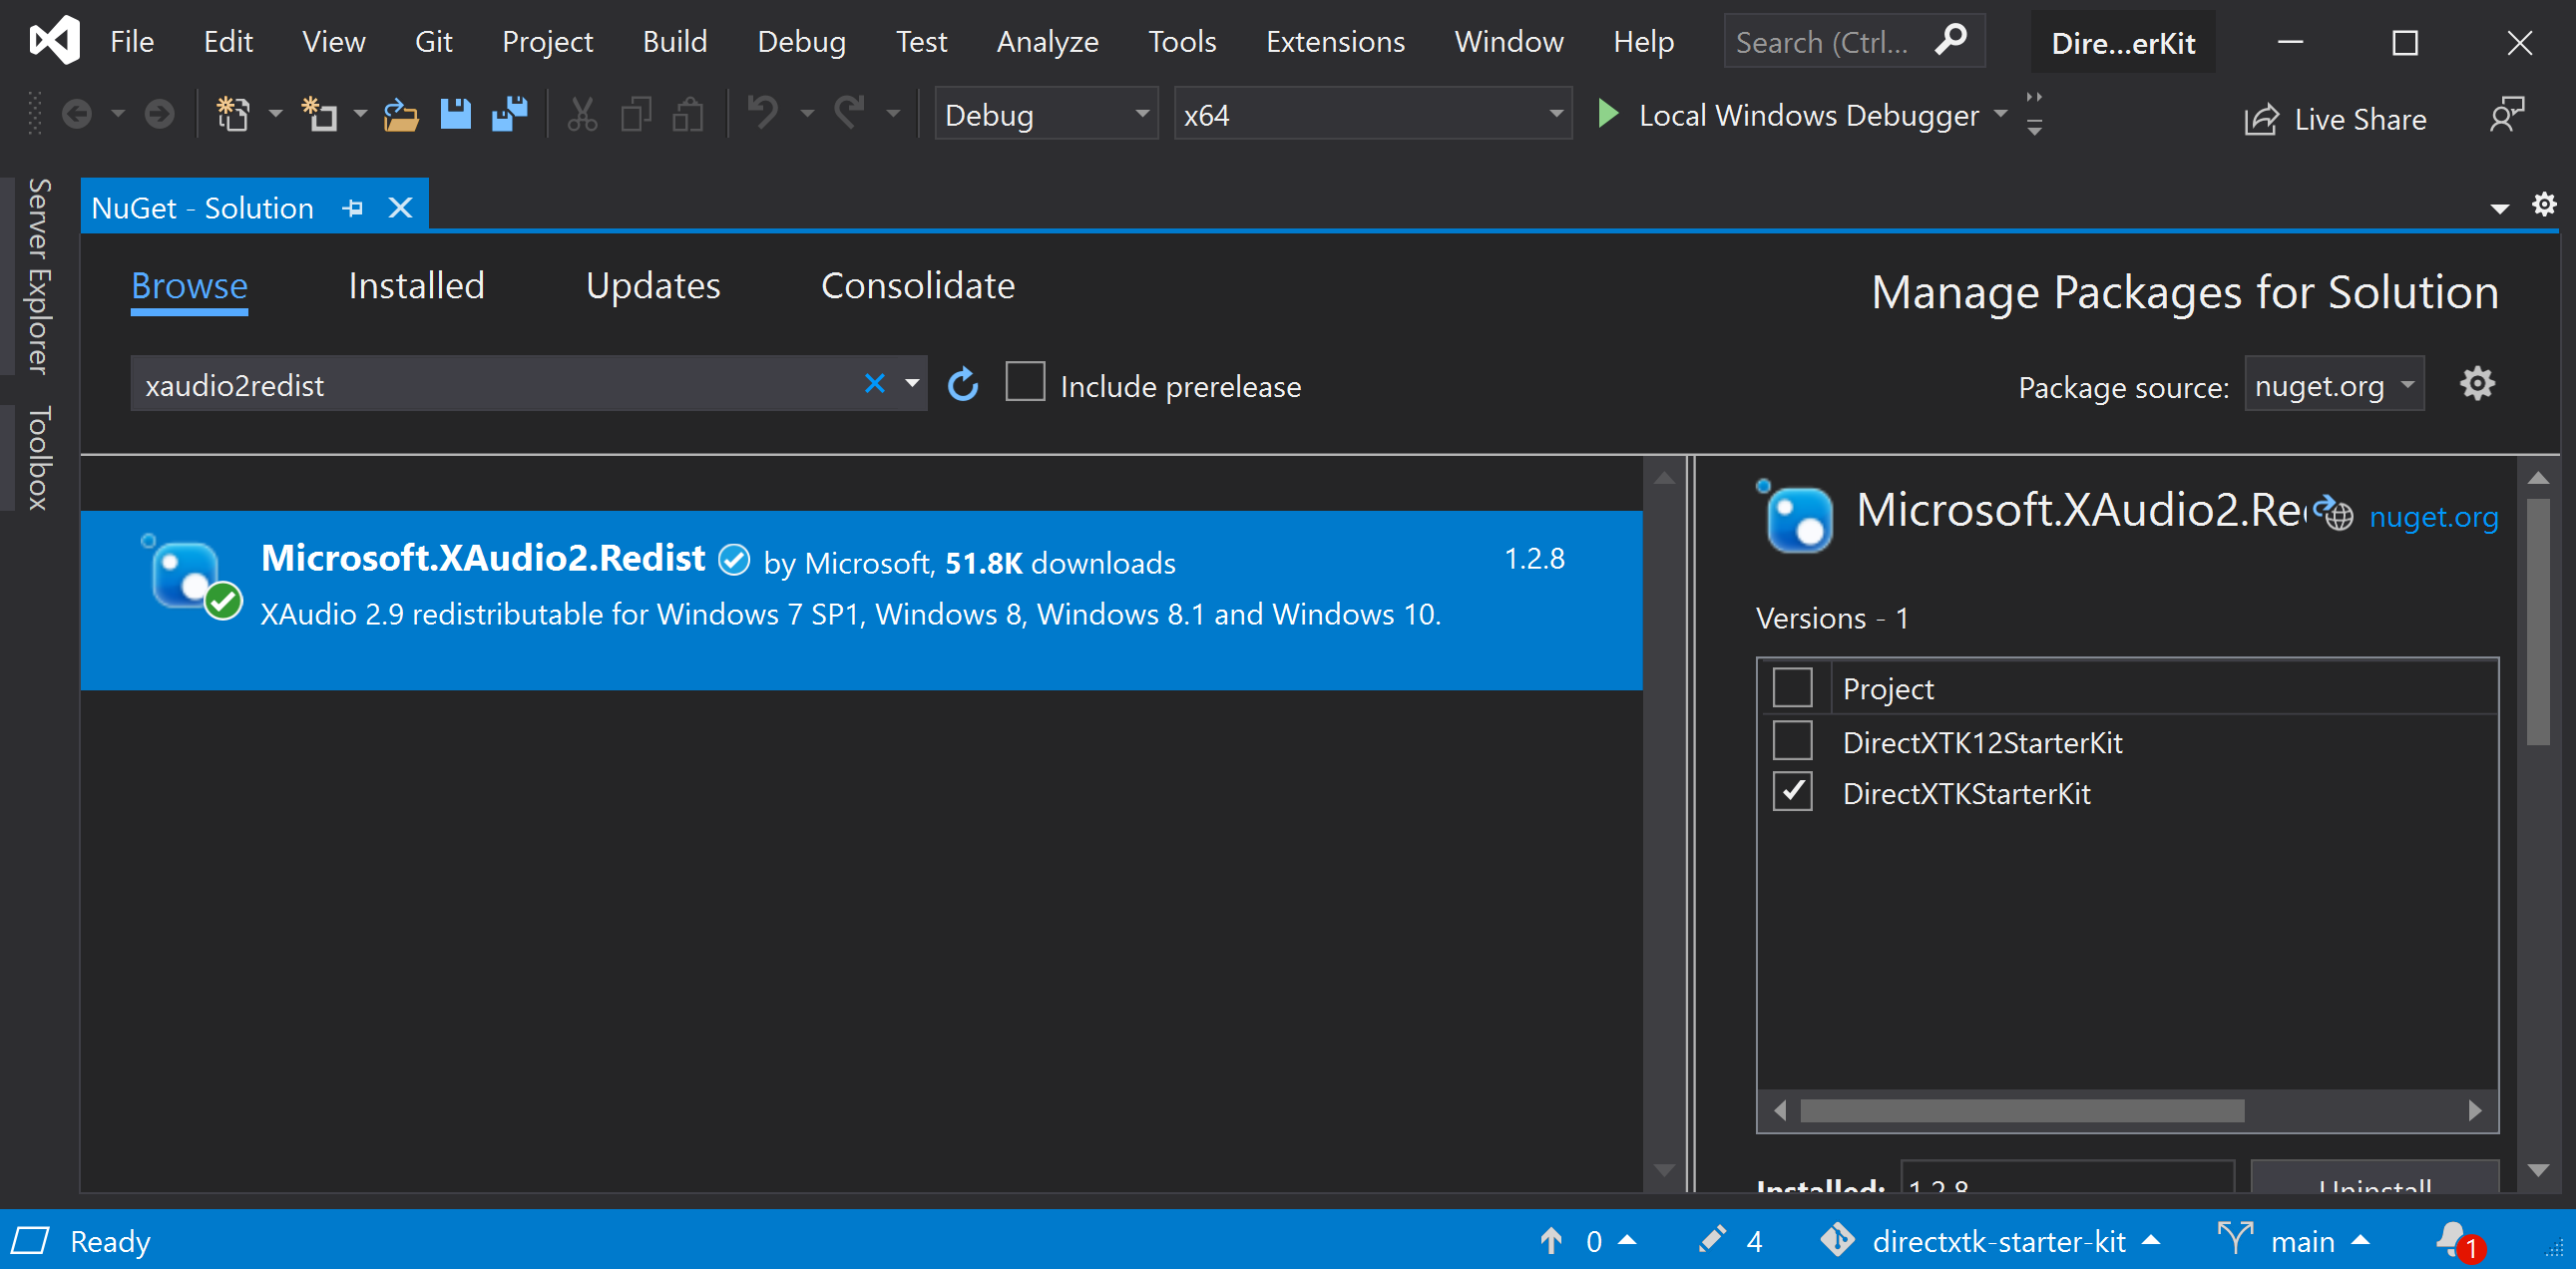 NuGet Package Manager (Microsoft.XAudio2.Redist)